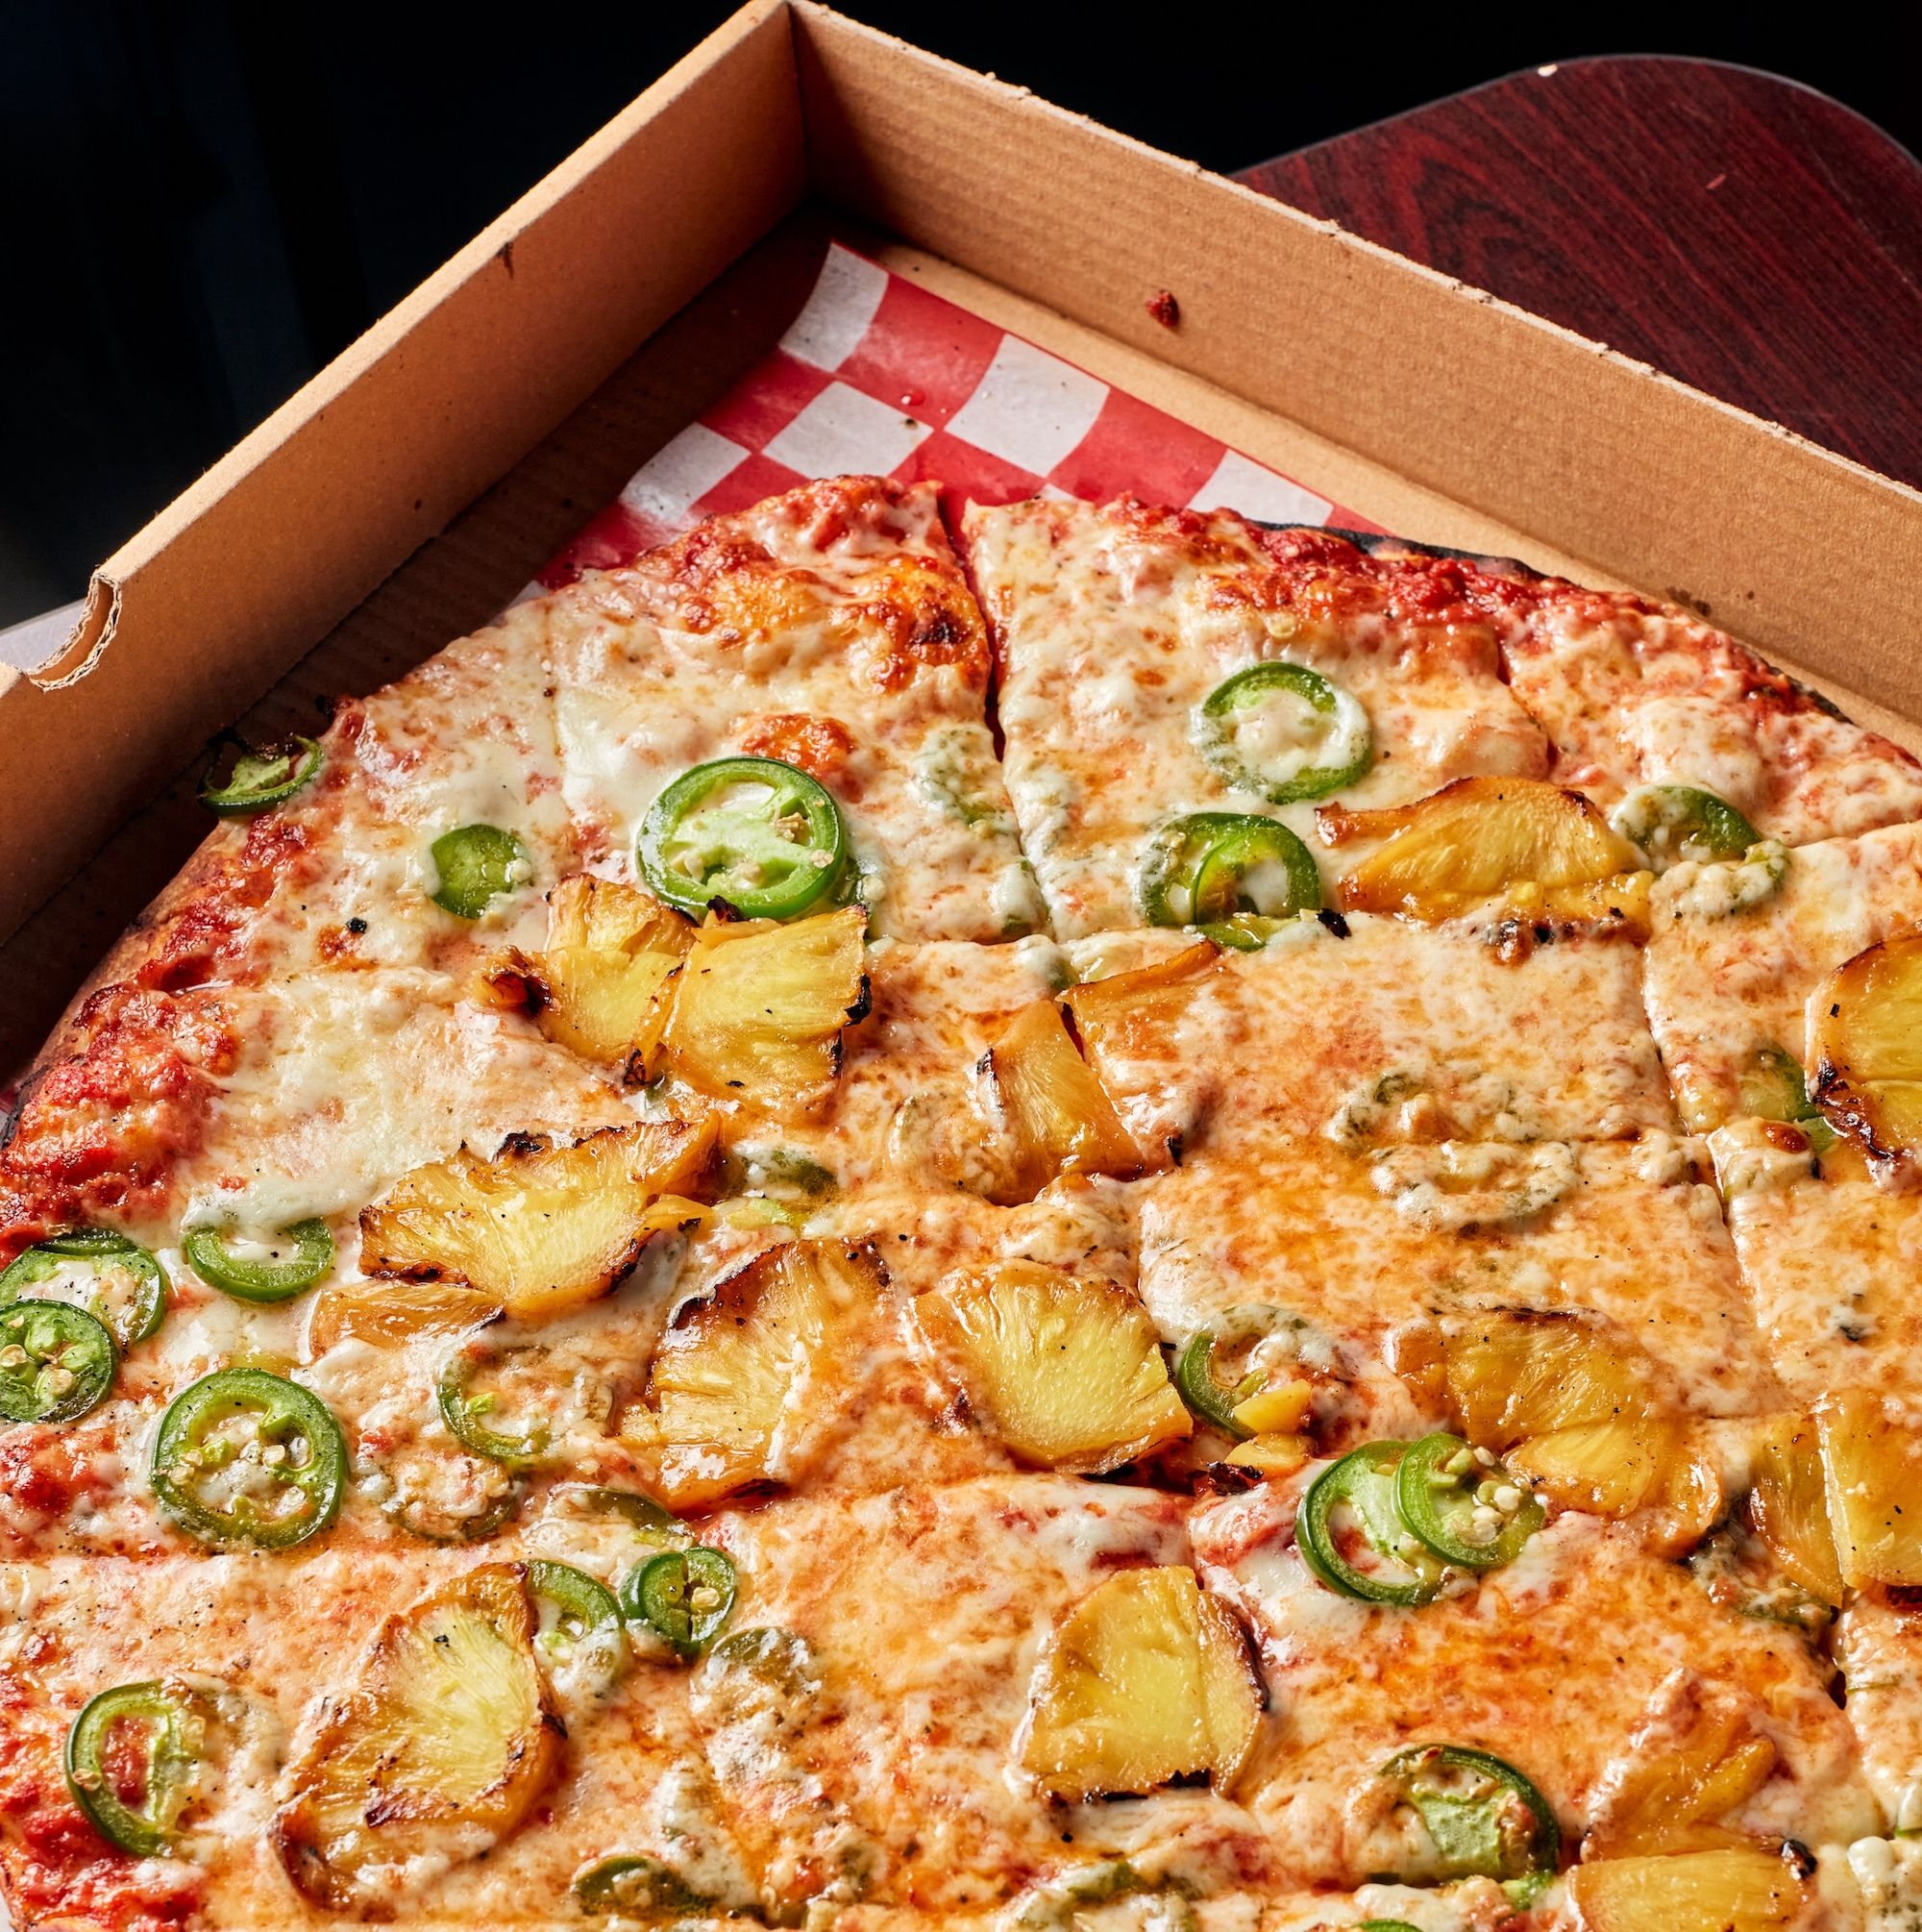 In Defense of Pineapple as a Pizza Topping